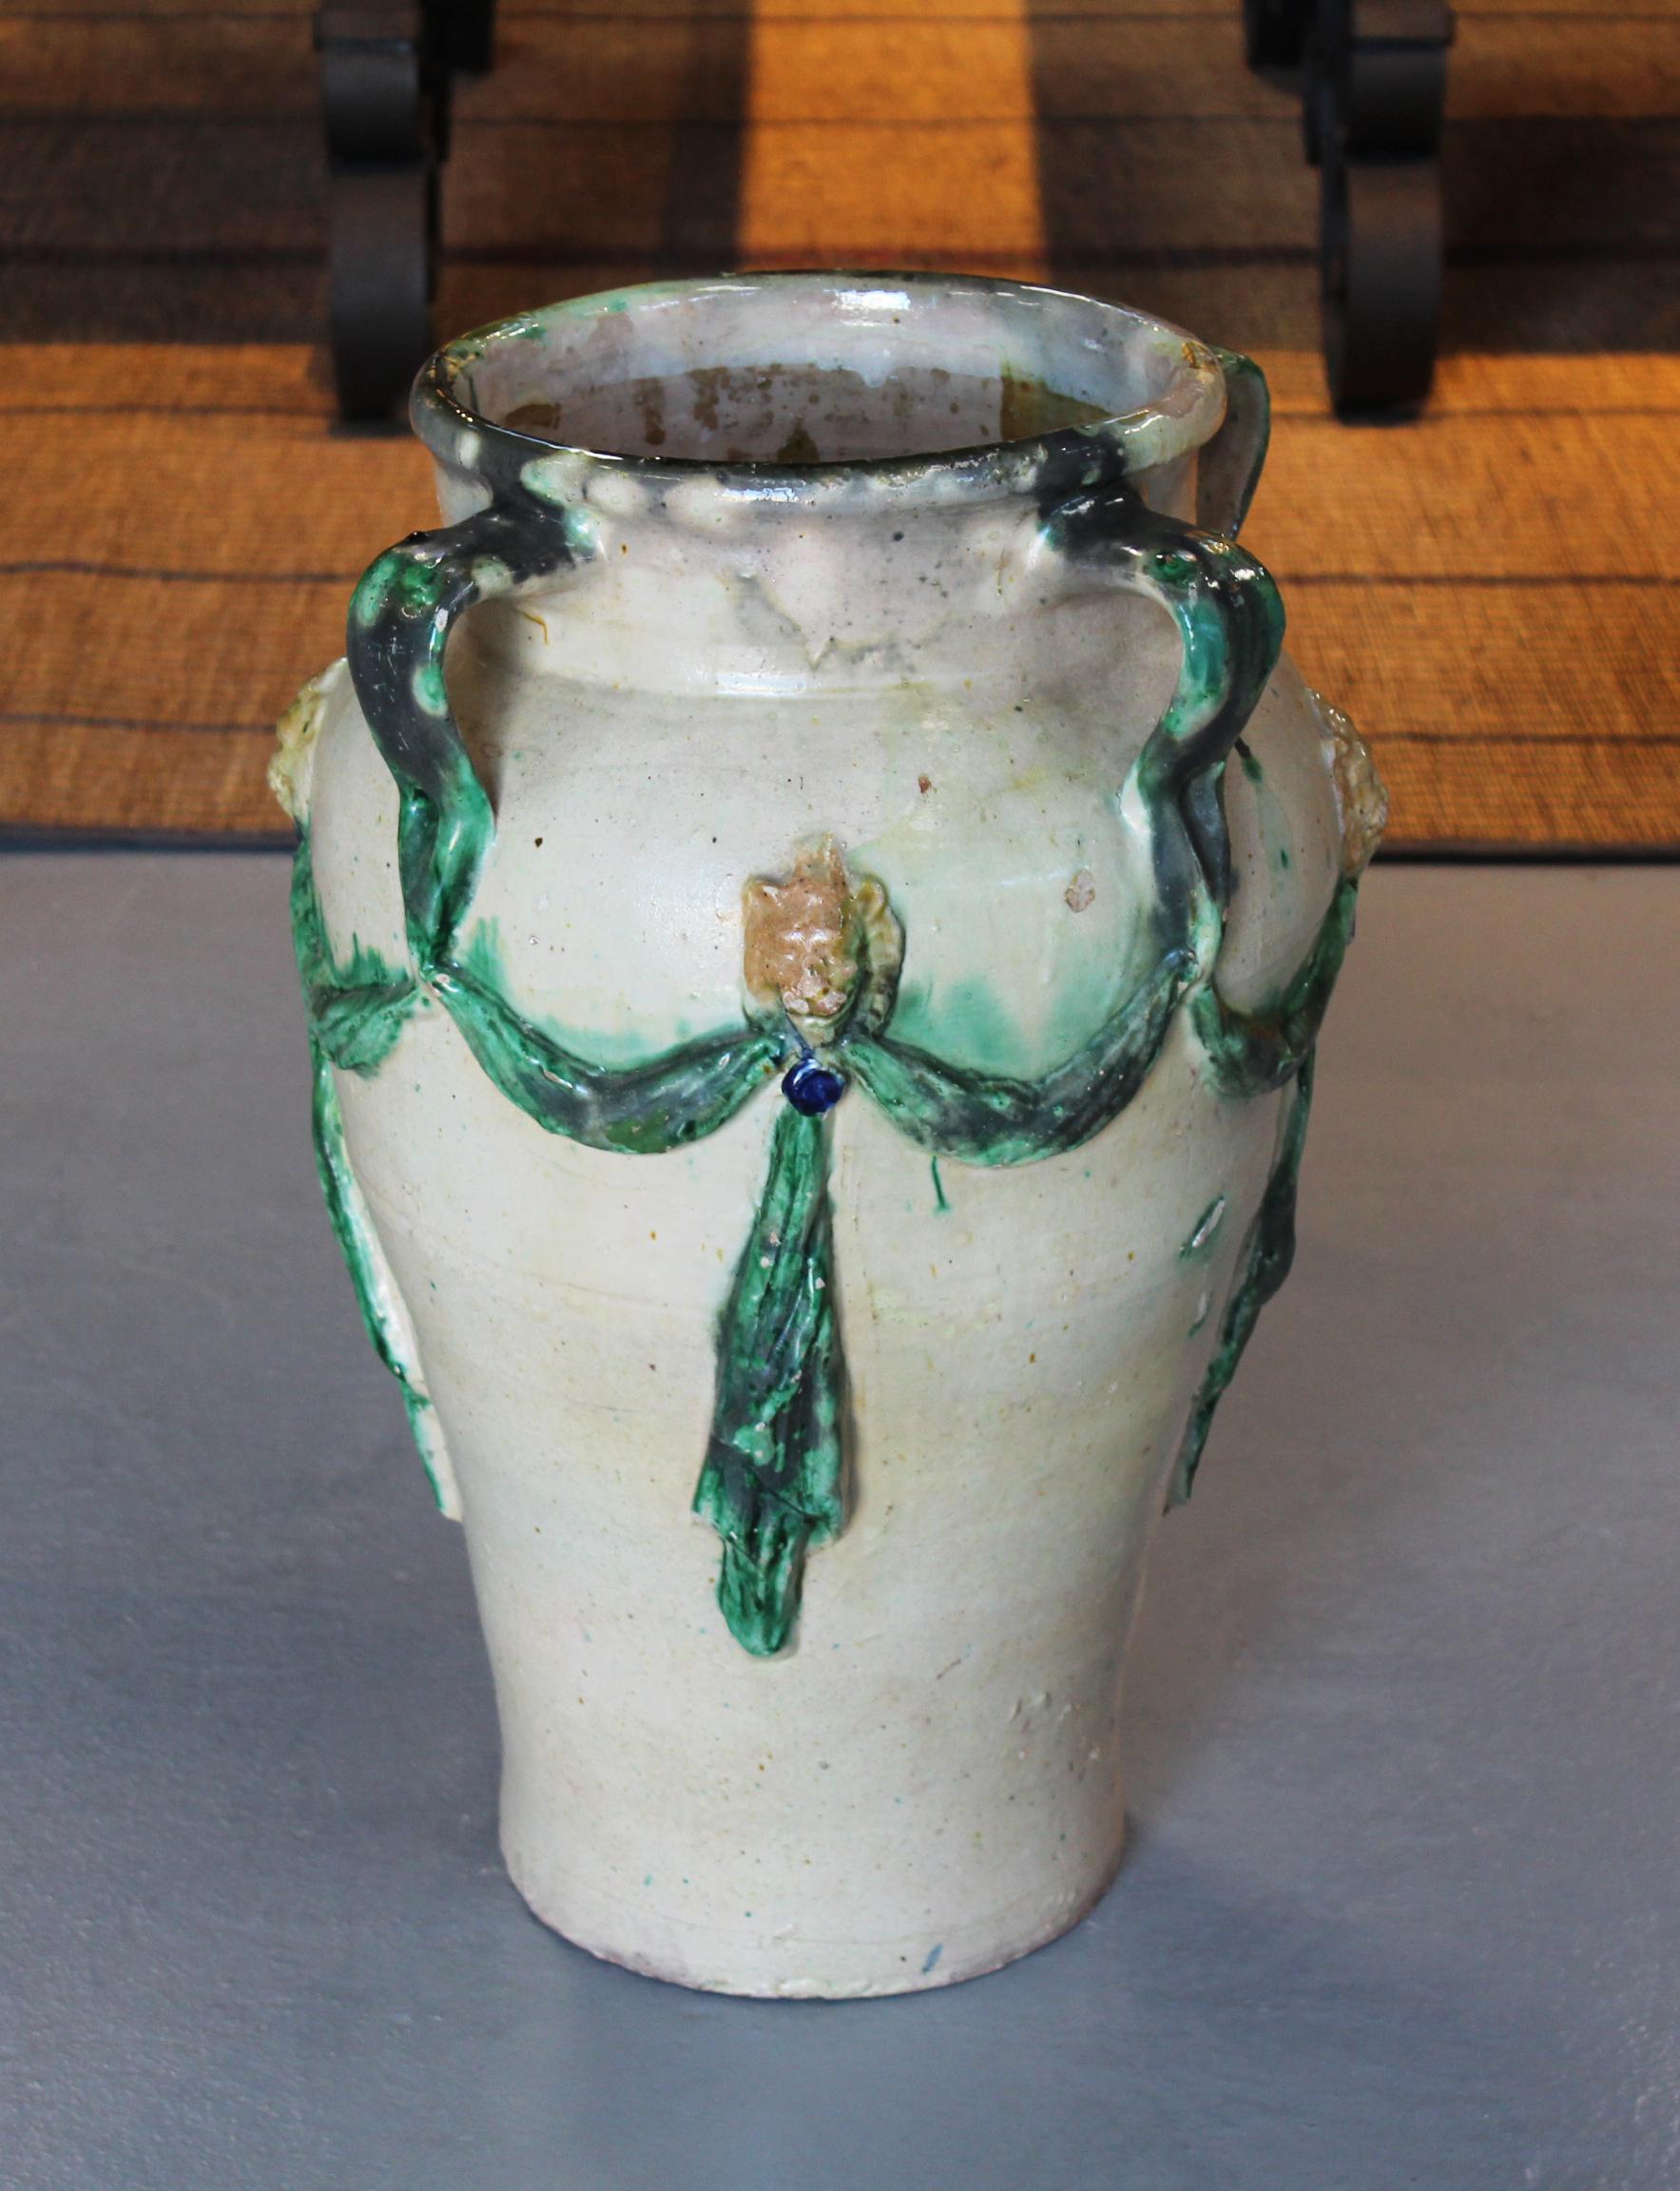 19th century Spanish Andalusian white glazed ceramic vase decorated with green garlands and yellow lion heads.